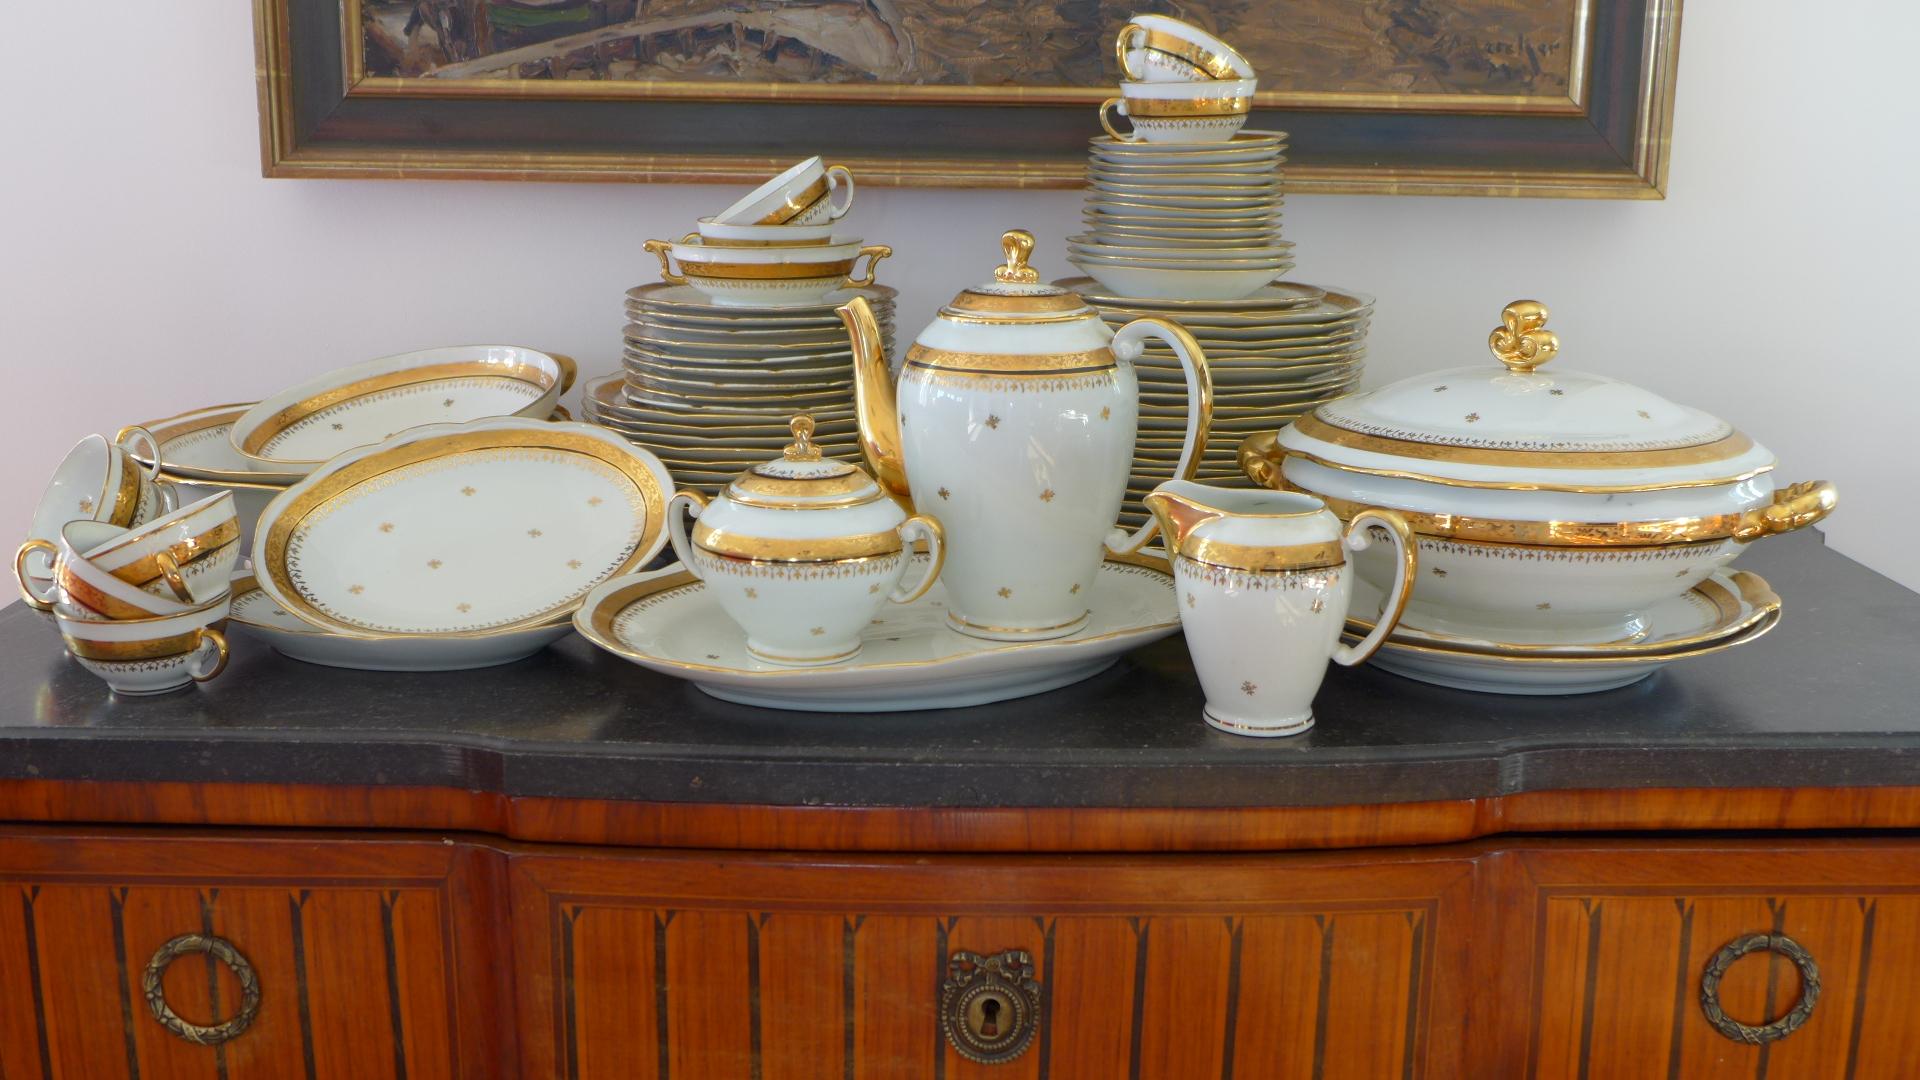 A very elegant 68 pieces French Limoges table service for 12 people, completed with its coffee/tea service for six people in very good condition with additional nice pieces. White brilliant porcelain with floral decoration on the edges in fine gold